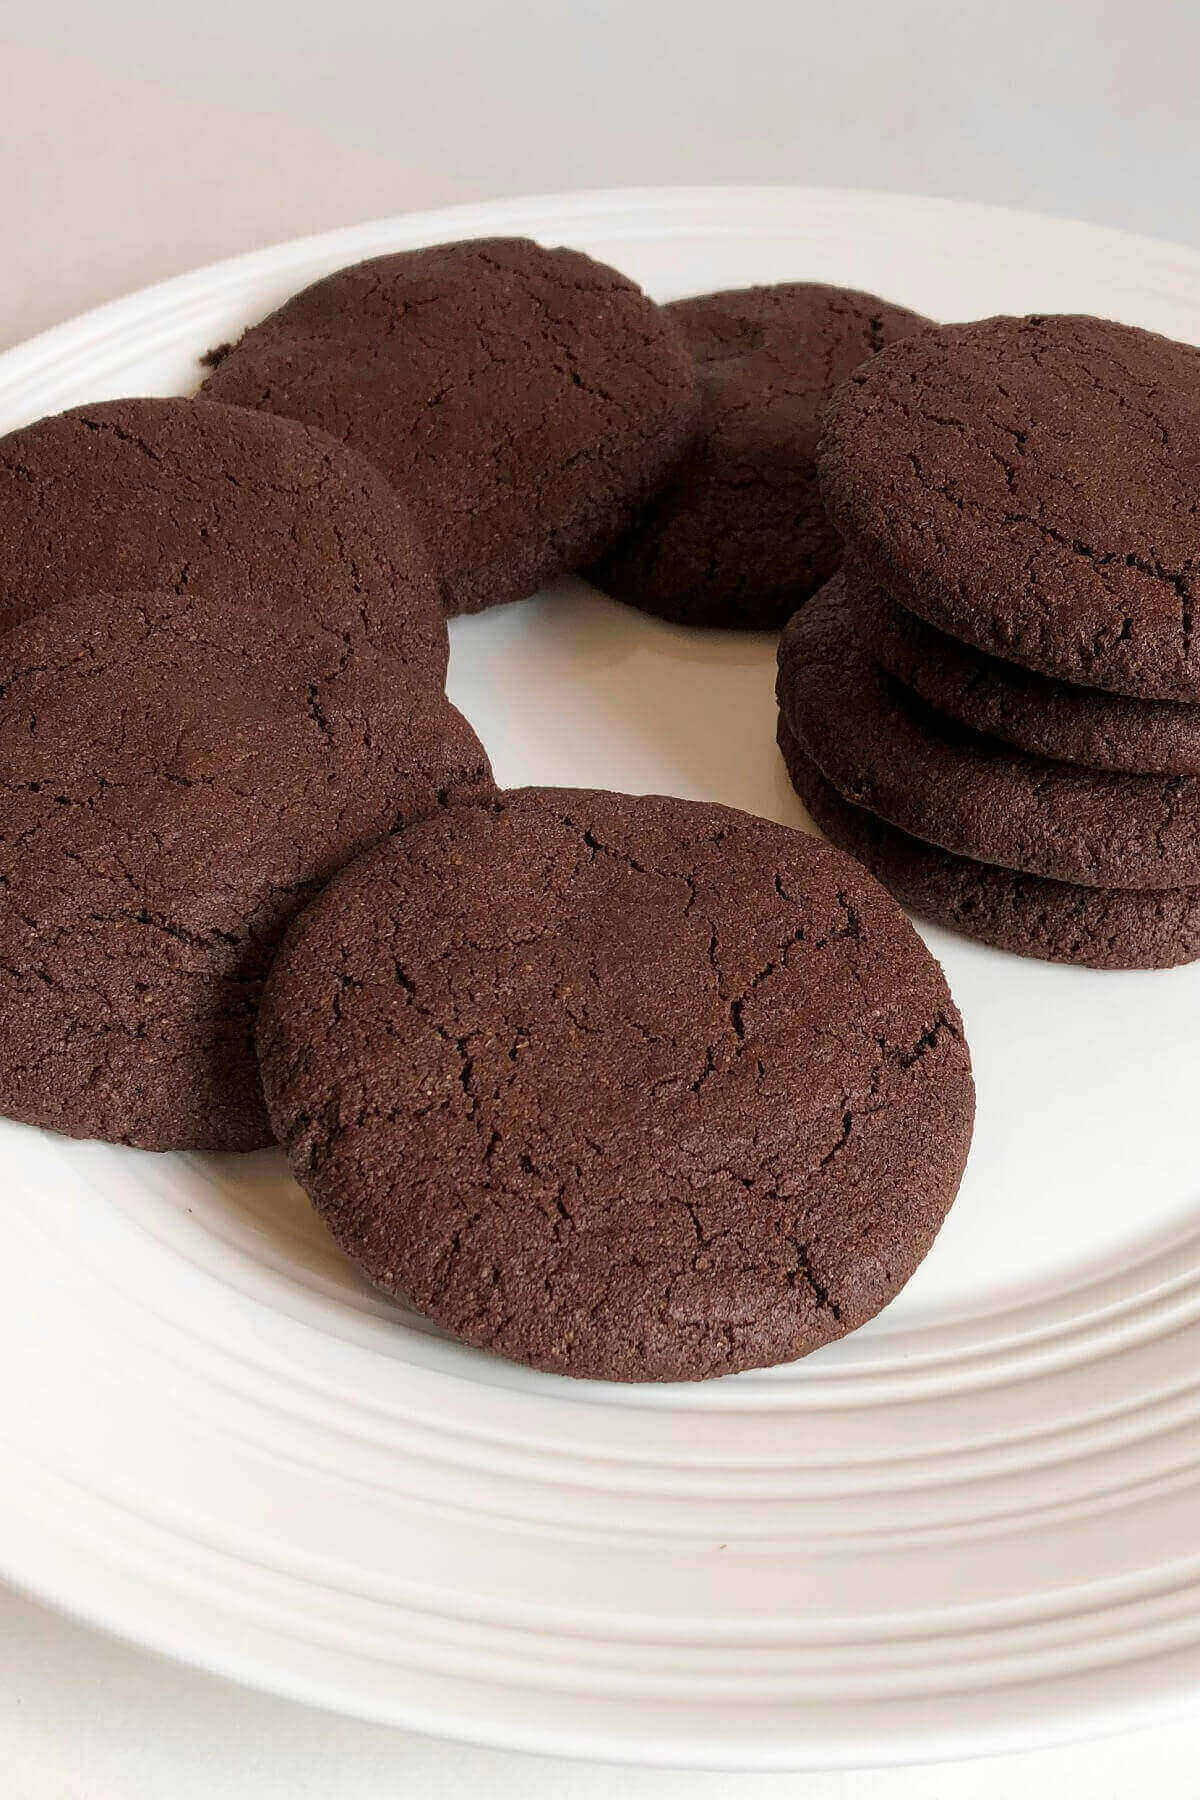 Chocolate spelt cookies displayed on a white plate.